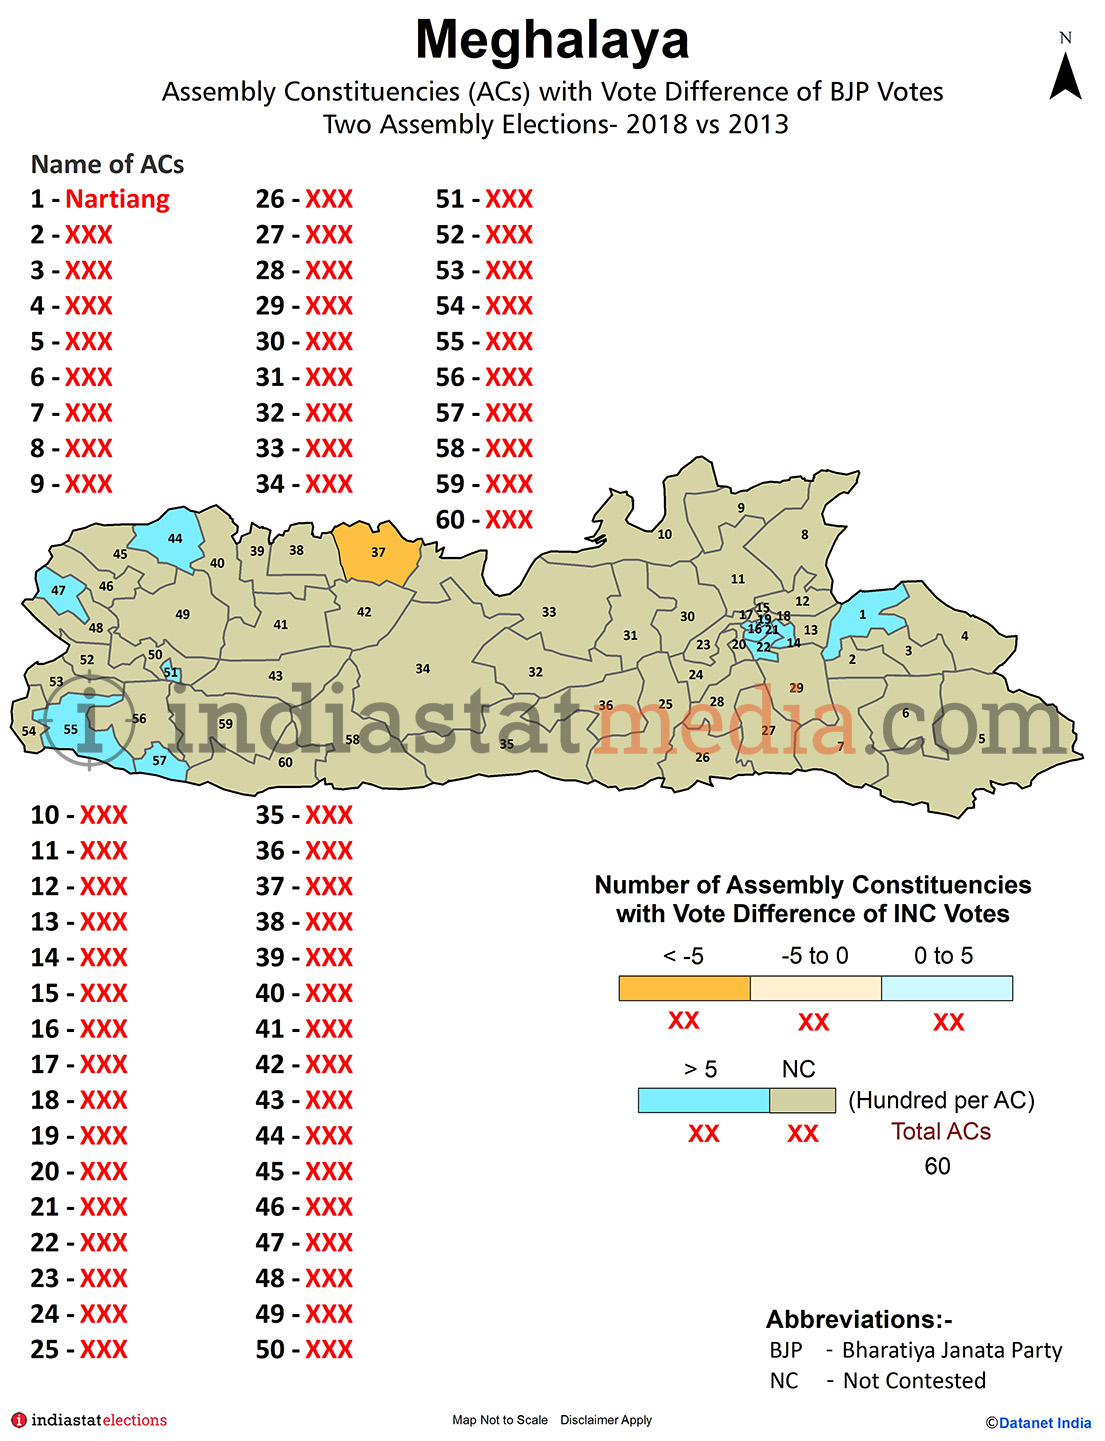 Assembly Constituencies with Vote Difference of BJP Votes in Meghalaya (Assembly Elections - 2013 & 2018)